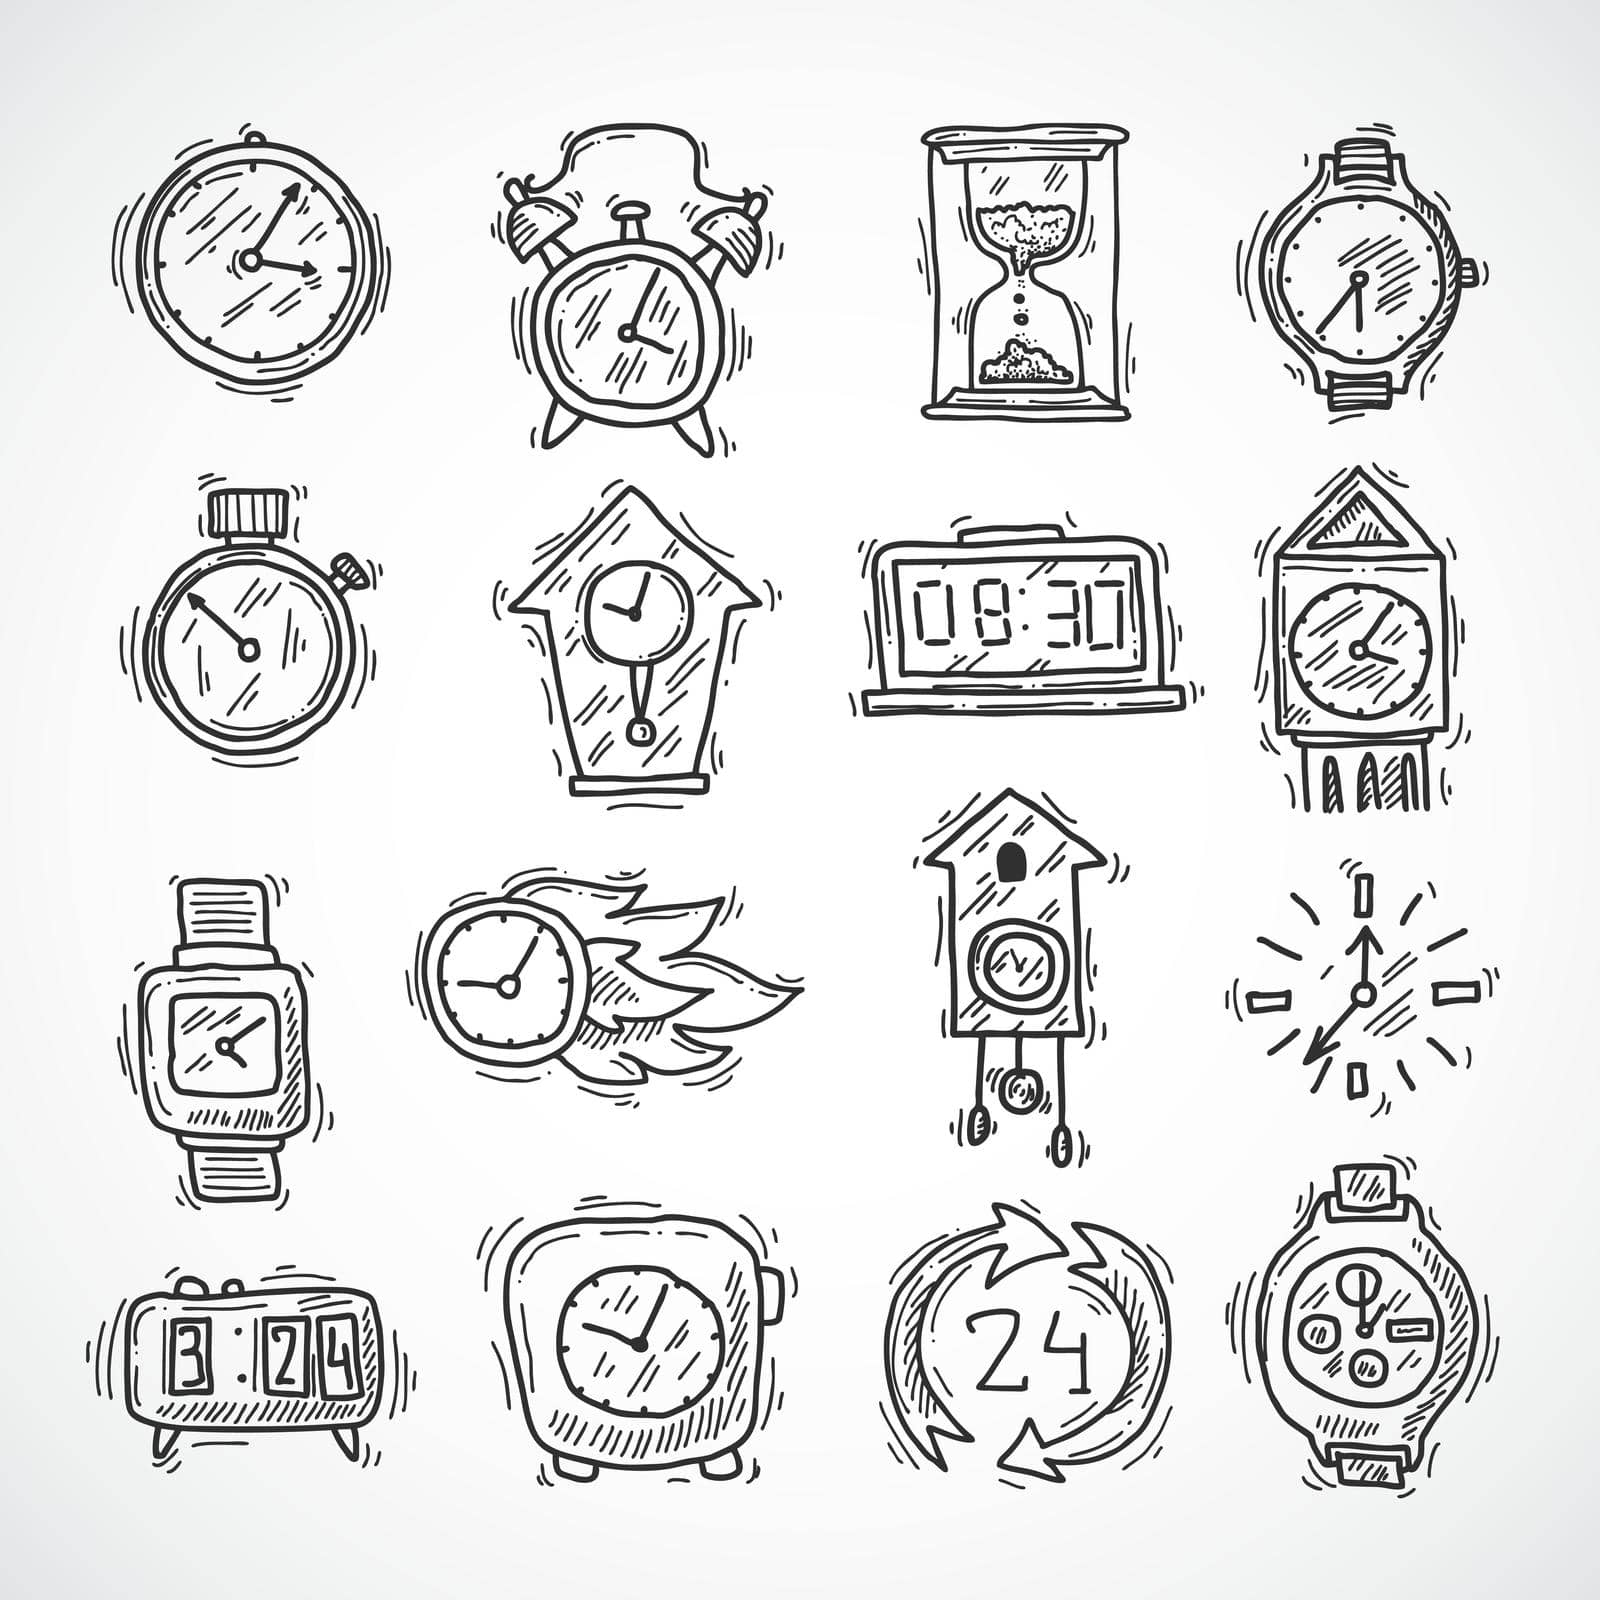 Clock sketch icons set with stopwatch alarm wall and sand clock isolated vector illustration